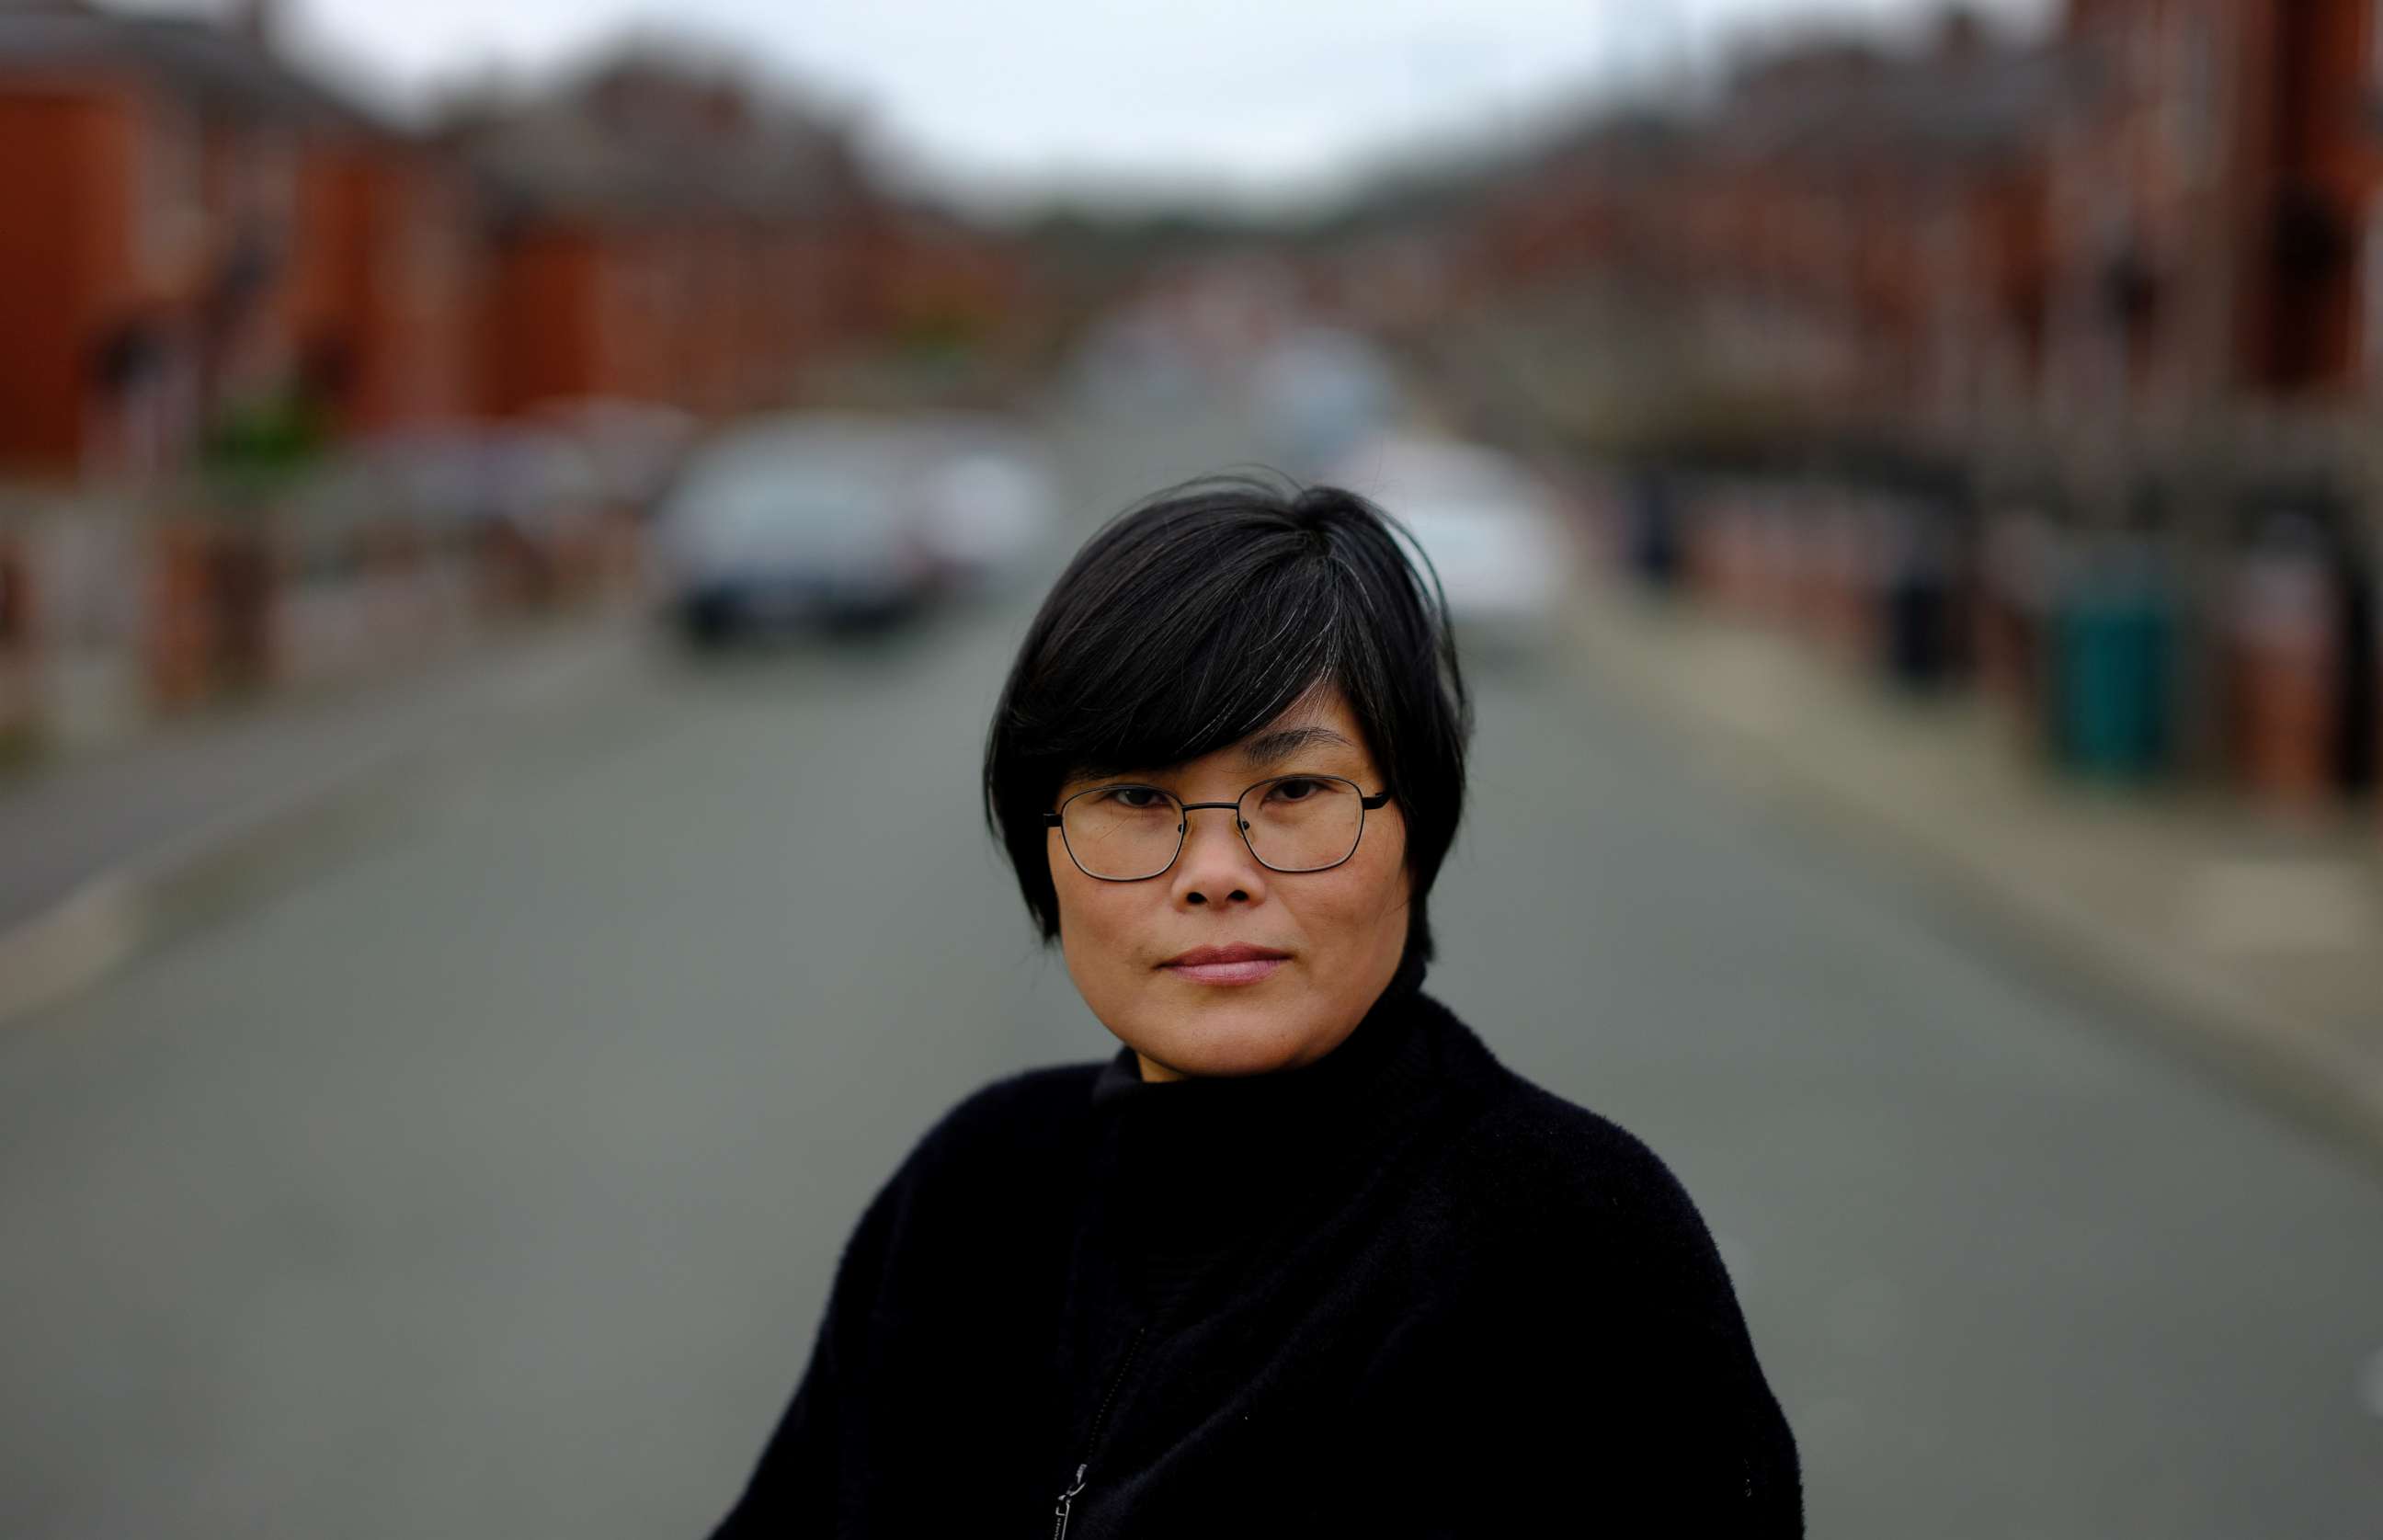 PHOTO: Jihyun Park, who fled North Korea before settling in Britain, poses for a photograph after deciding to stand for election as a Conservative party candidate in the upcoming local elections in the Moorside Ward in Bury, Britain, March 22, 2021.